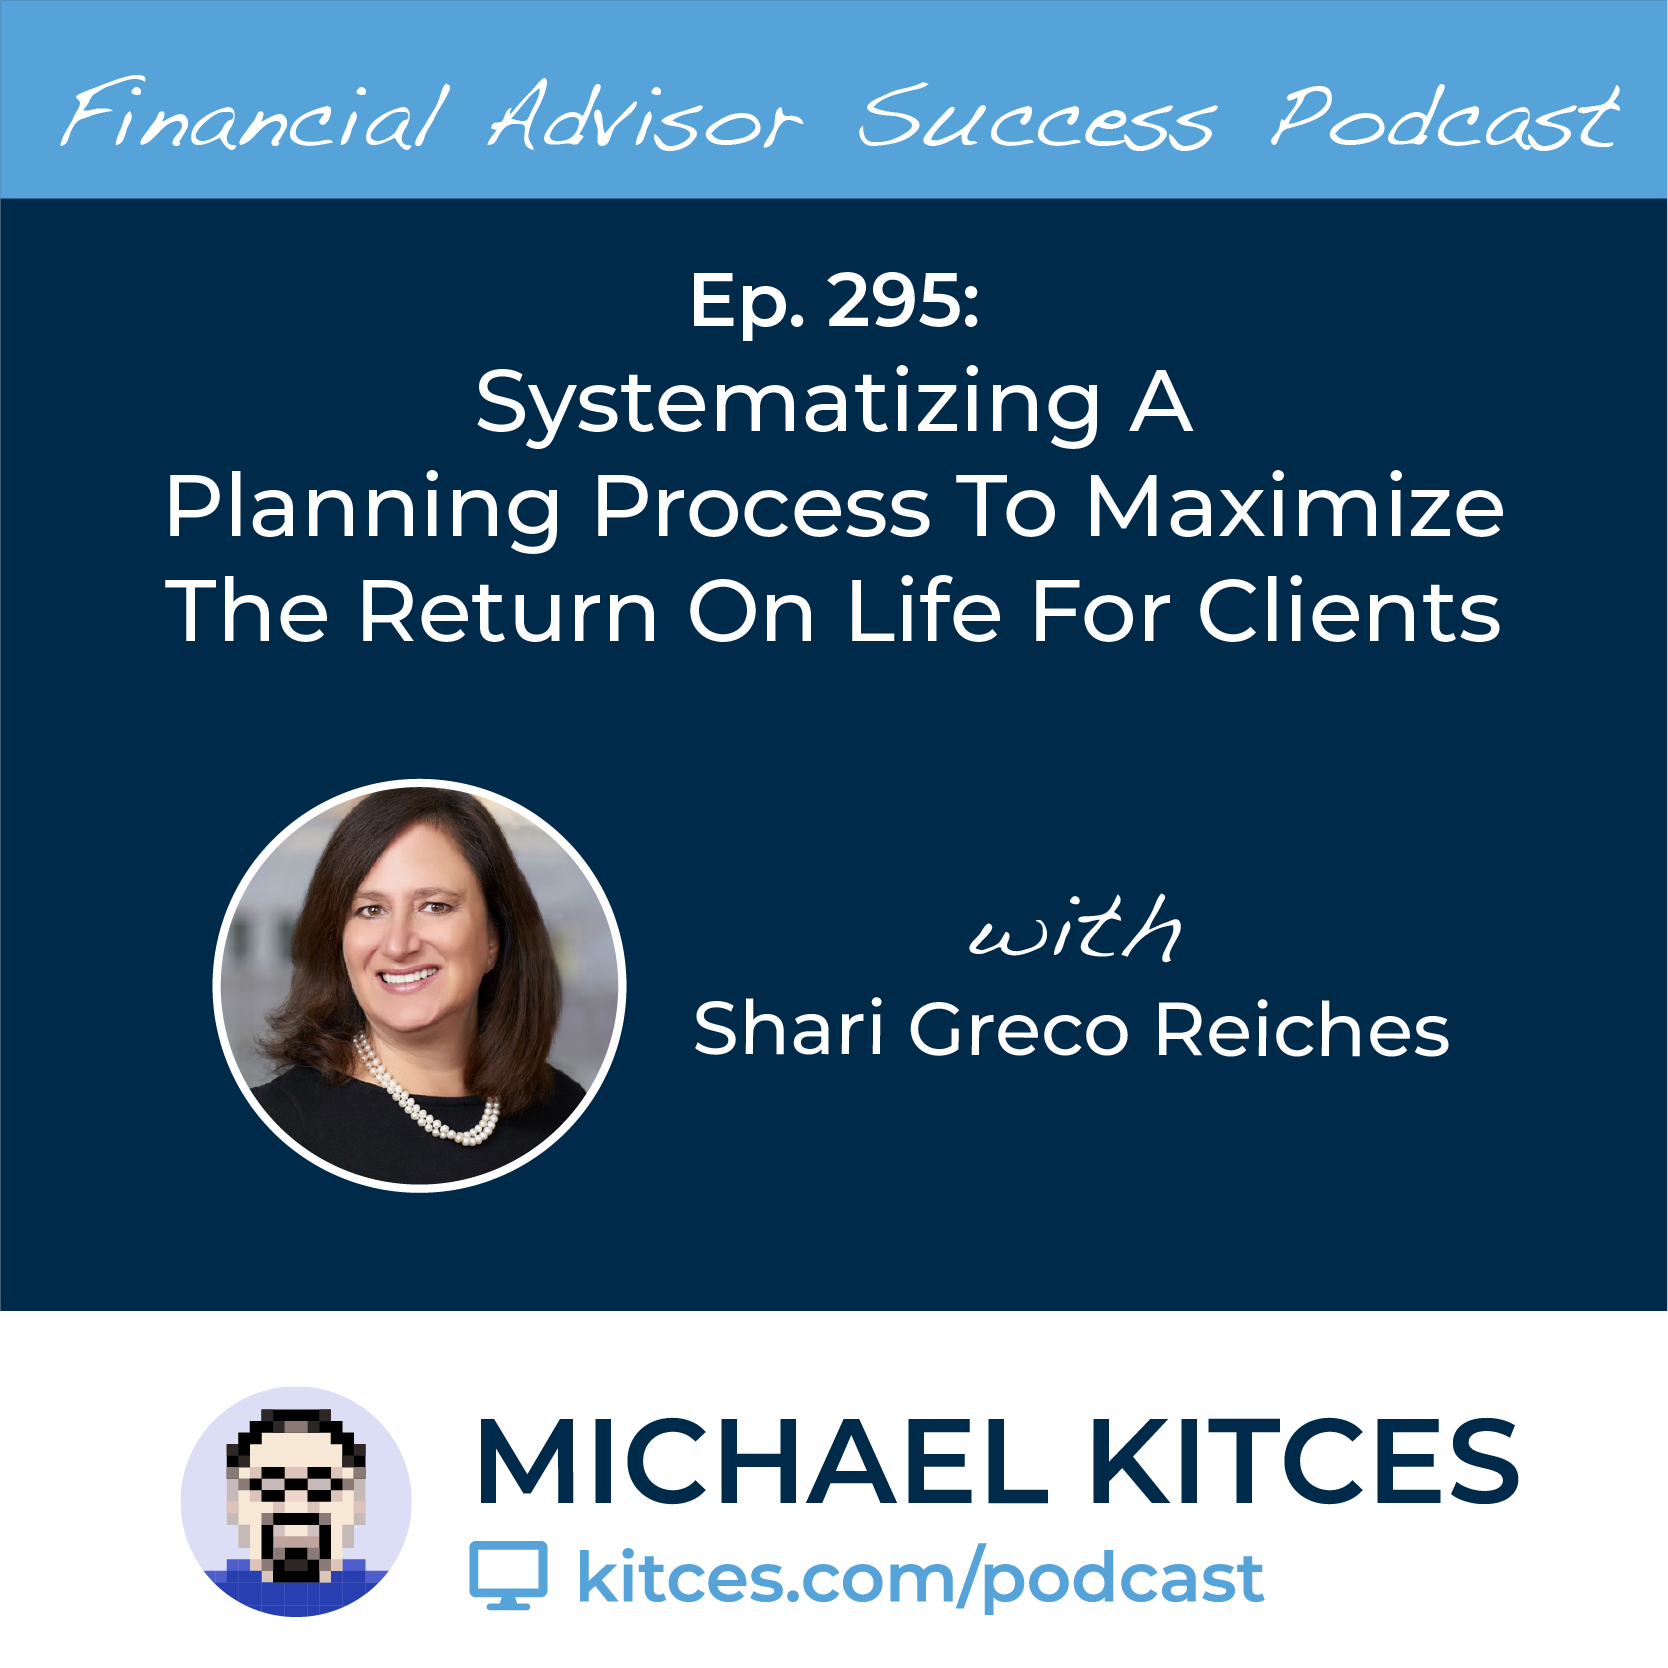 Systematizing Planning To Maximize Clients' Return On Life